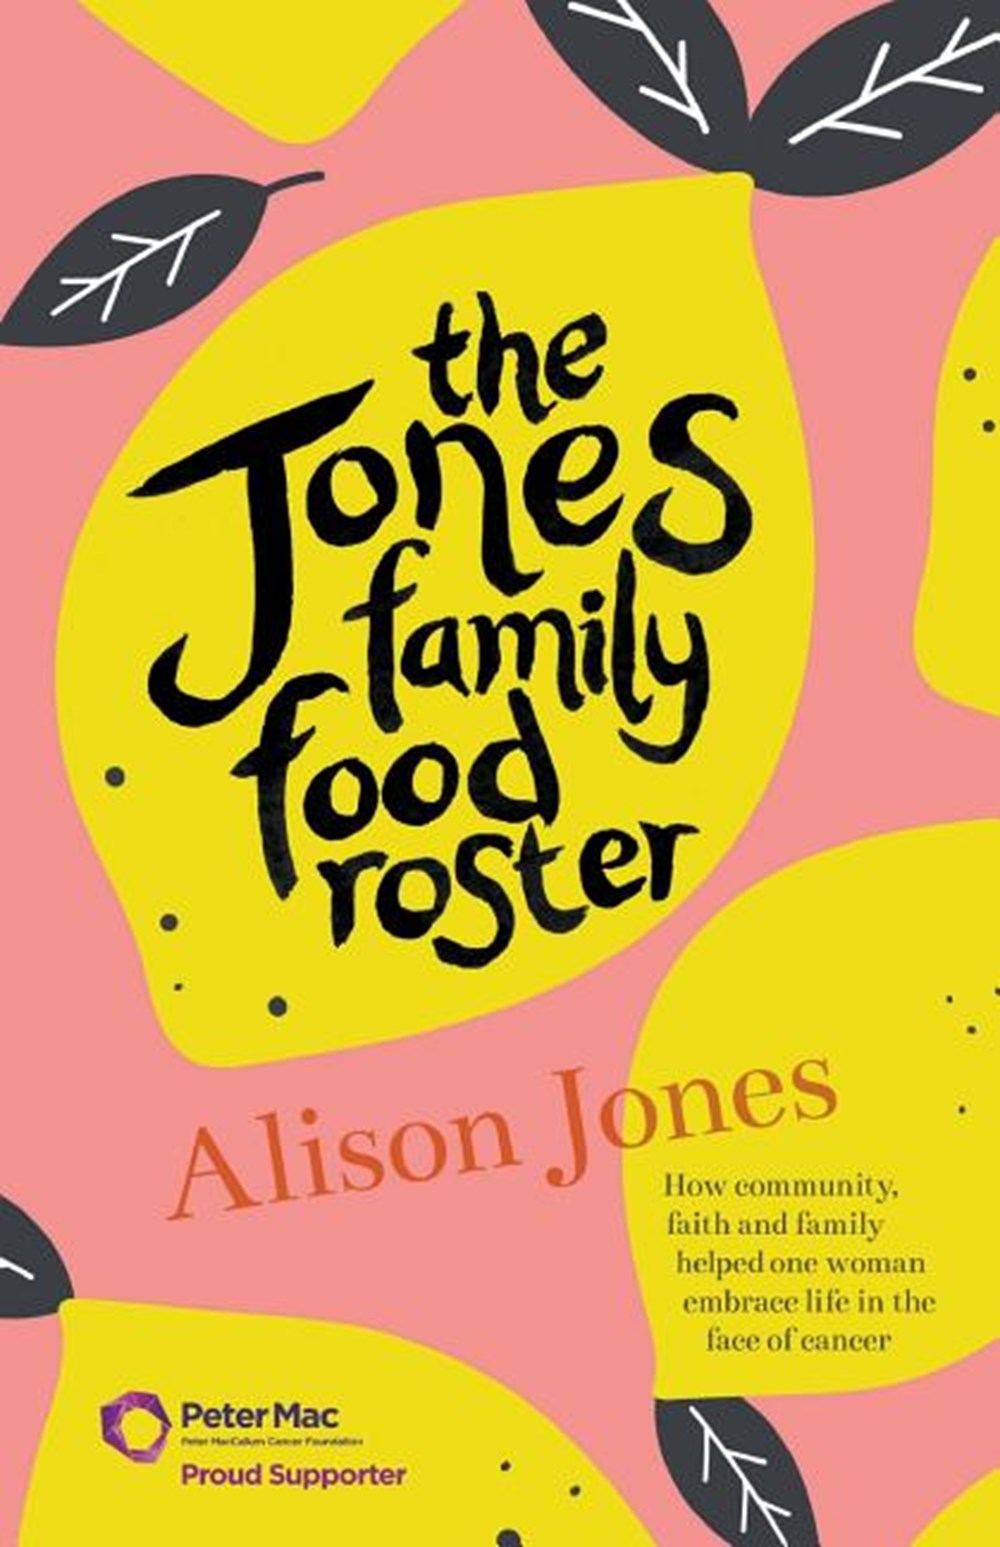 Jones Family Food Roster: How Community, Faith and Family Helped One Woman Embrace Life in the Face 